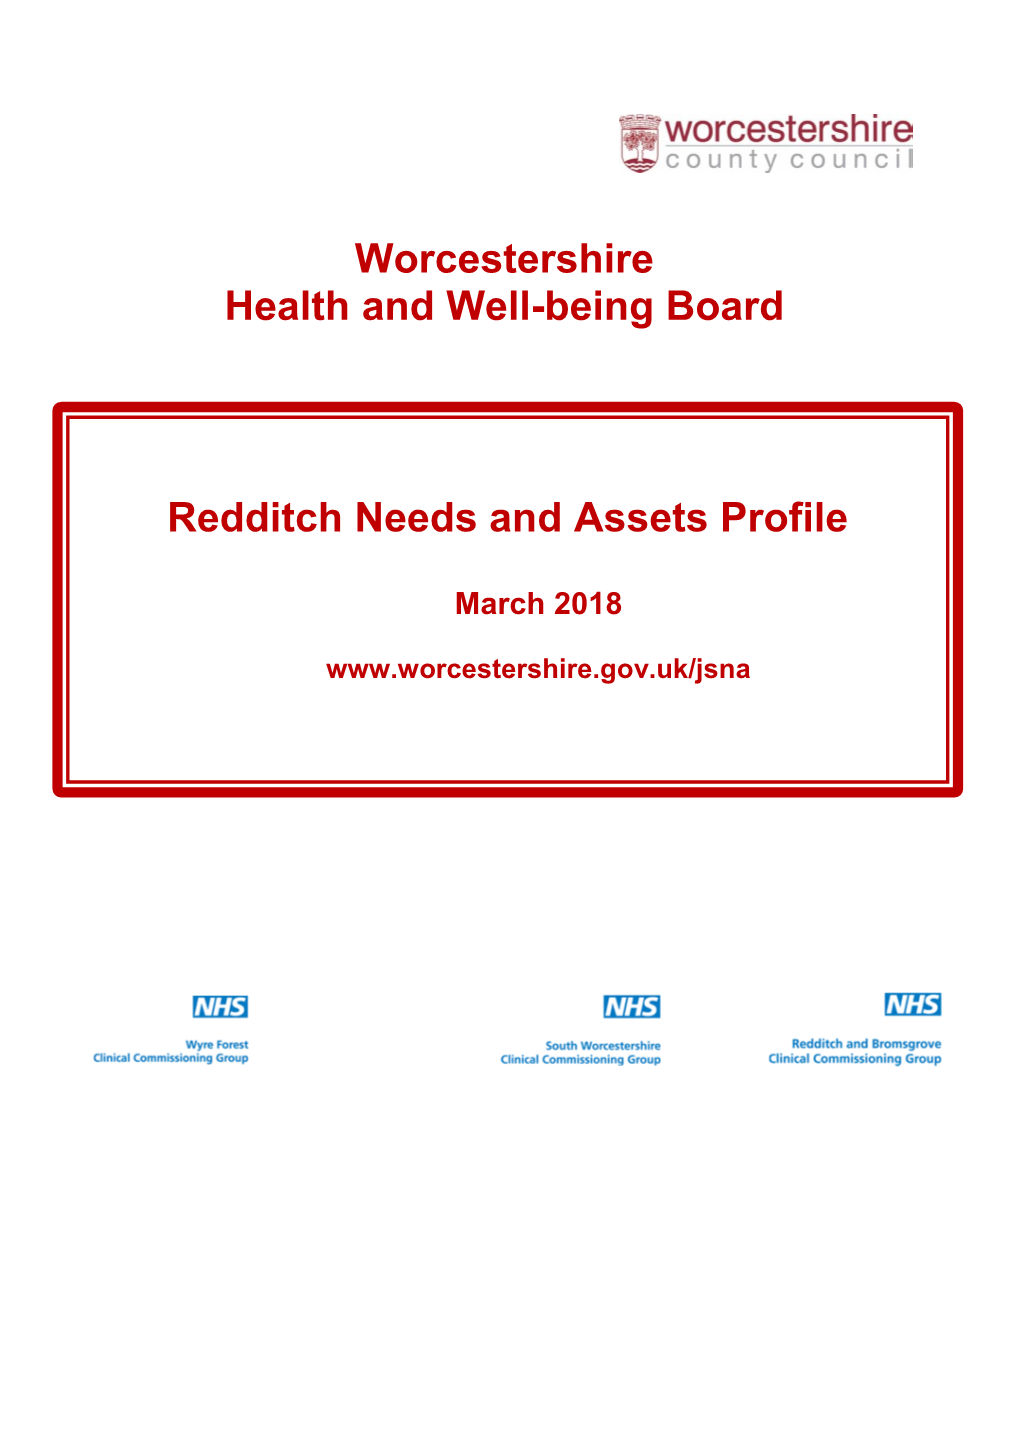 Worcestershire Health and Well-Being Board Redditch Needs